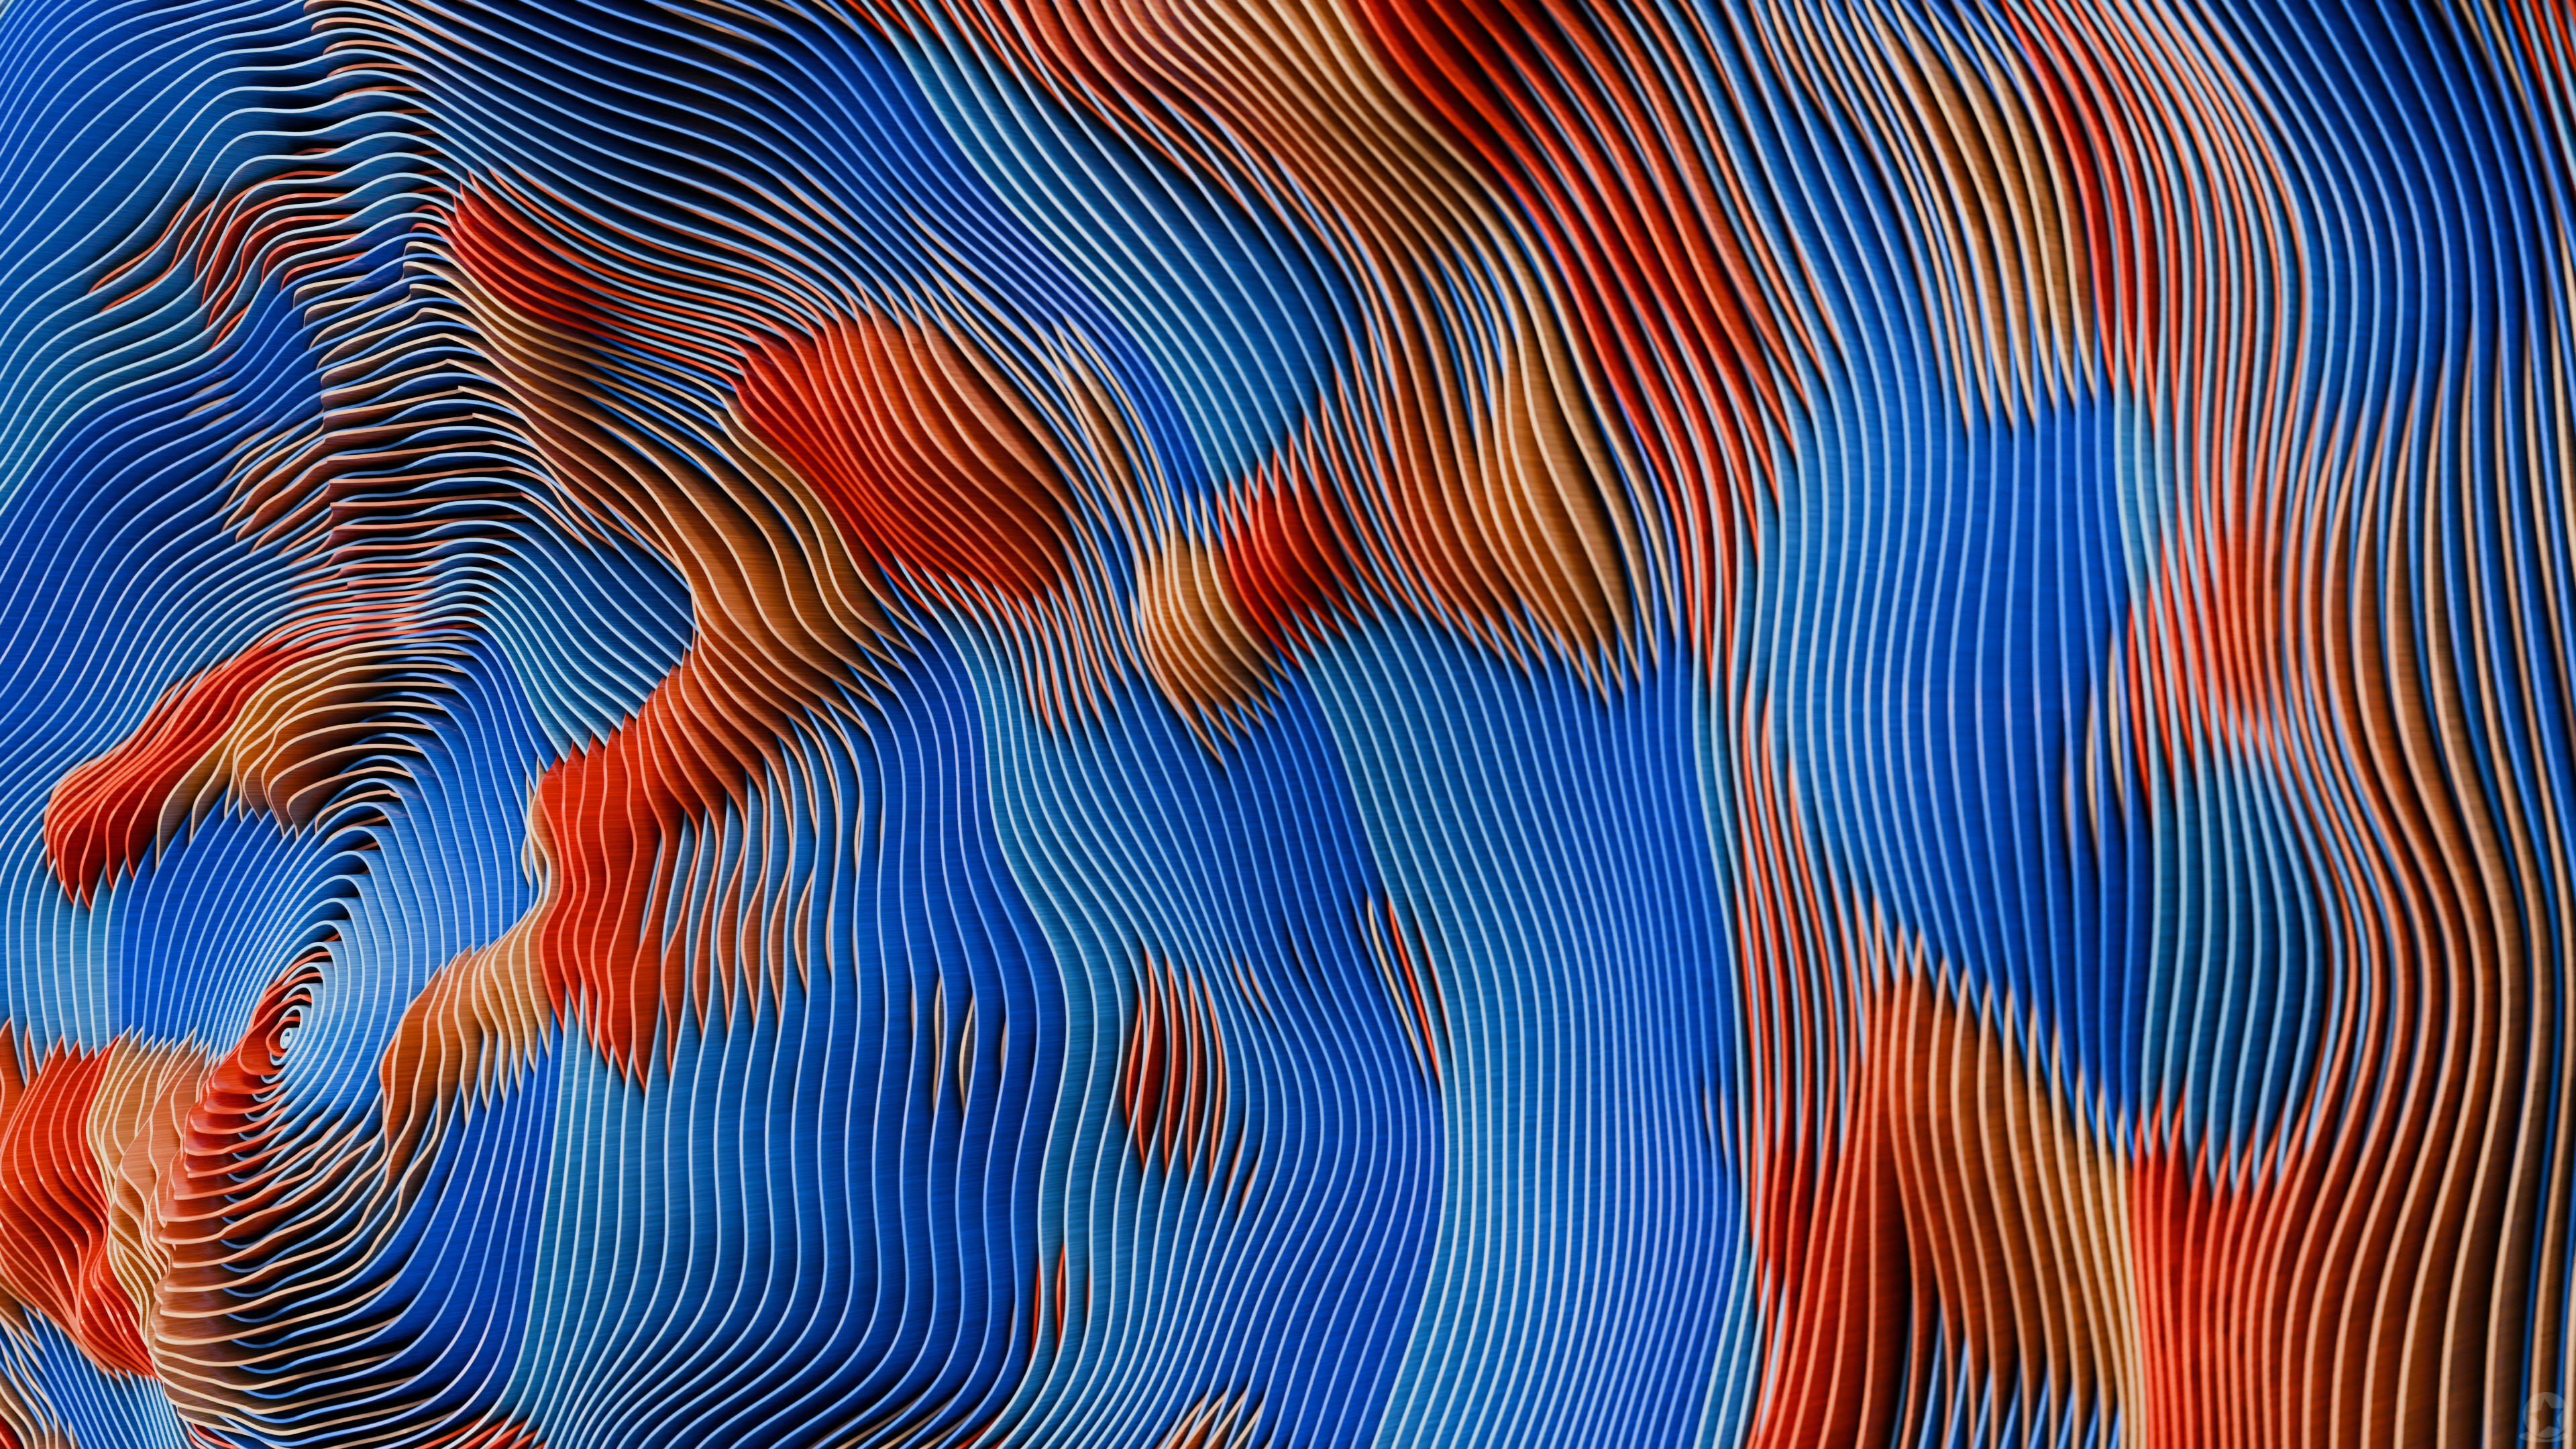 Abstract 3D Abstract Blender Colorful Optical Art 3840x2160